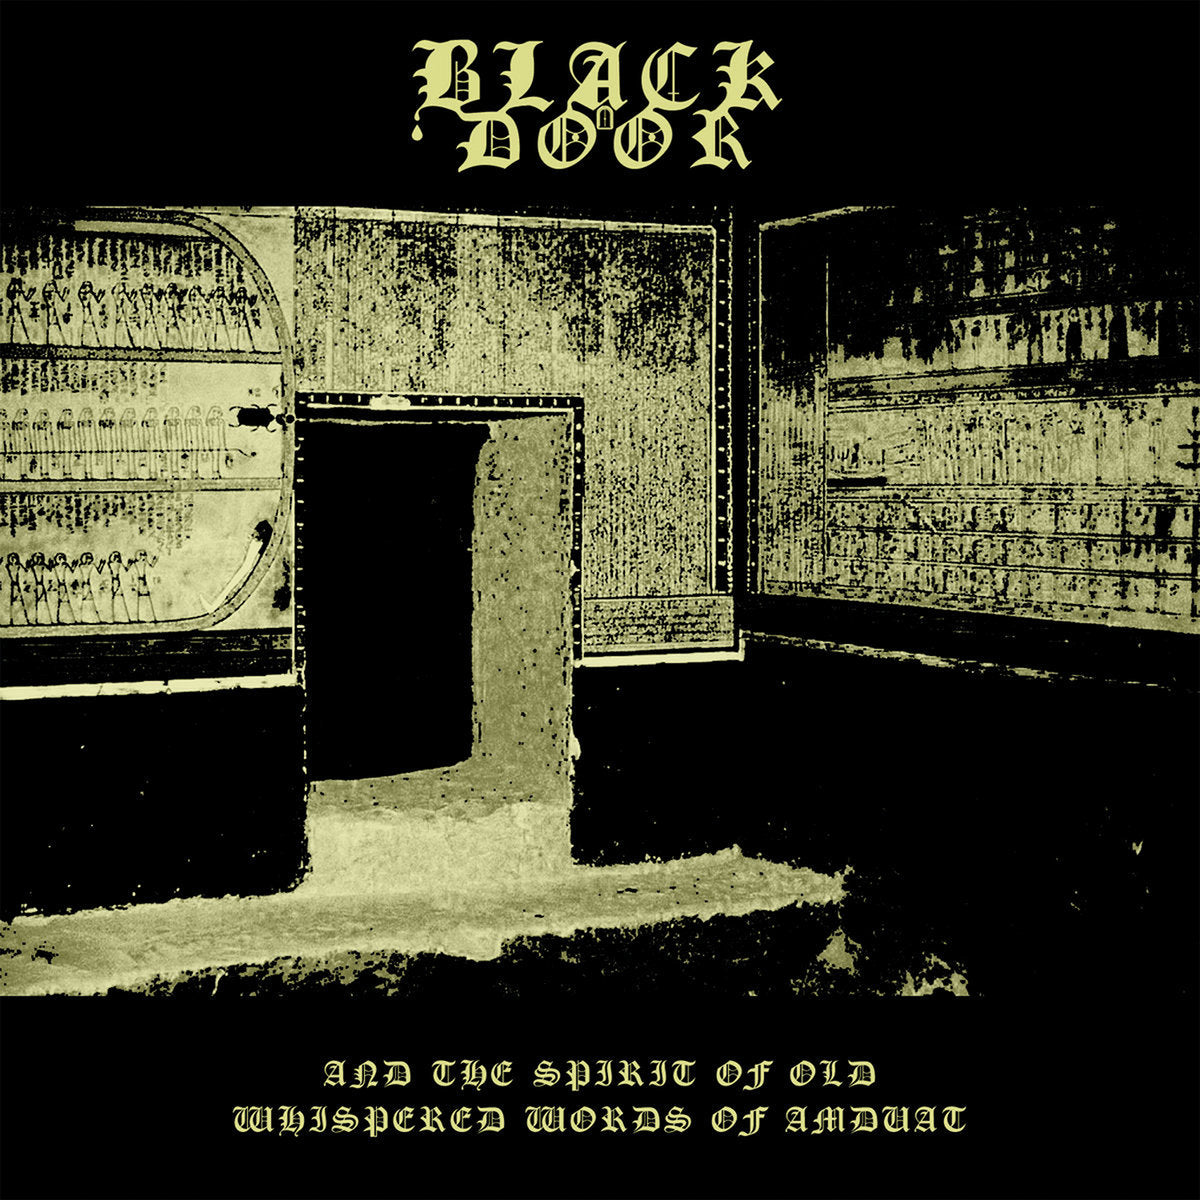 BLACK DOOR "And The Spirit Of Old Whispered Words Of Amduat" LP